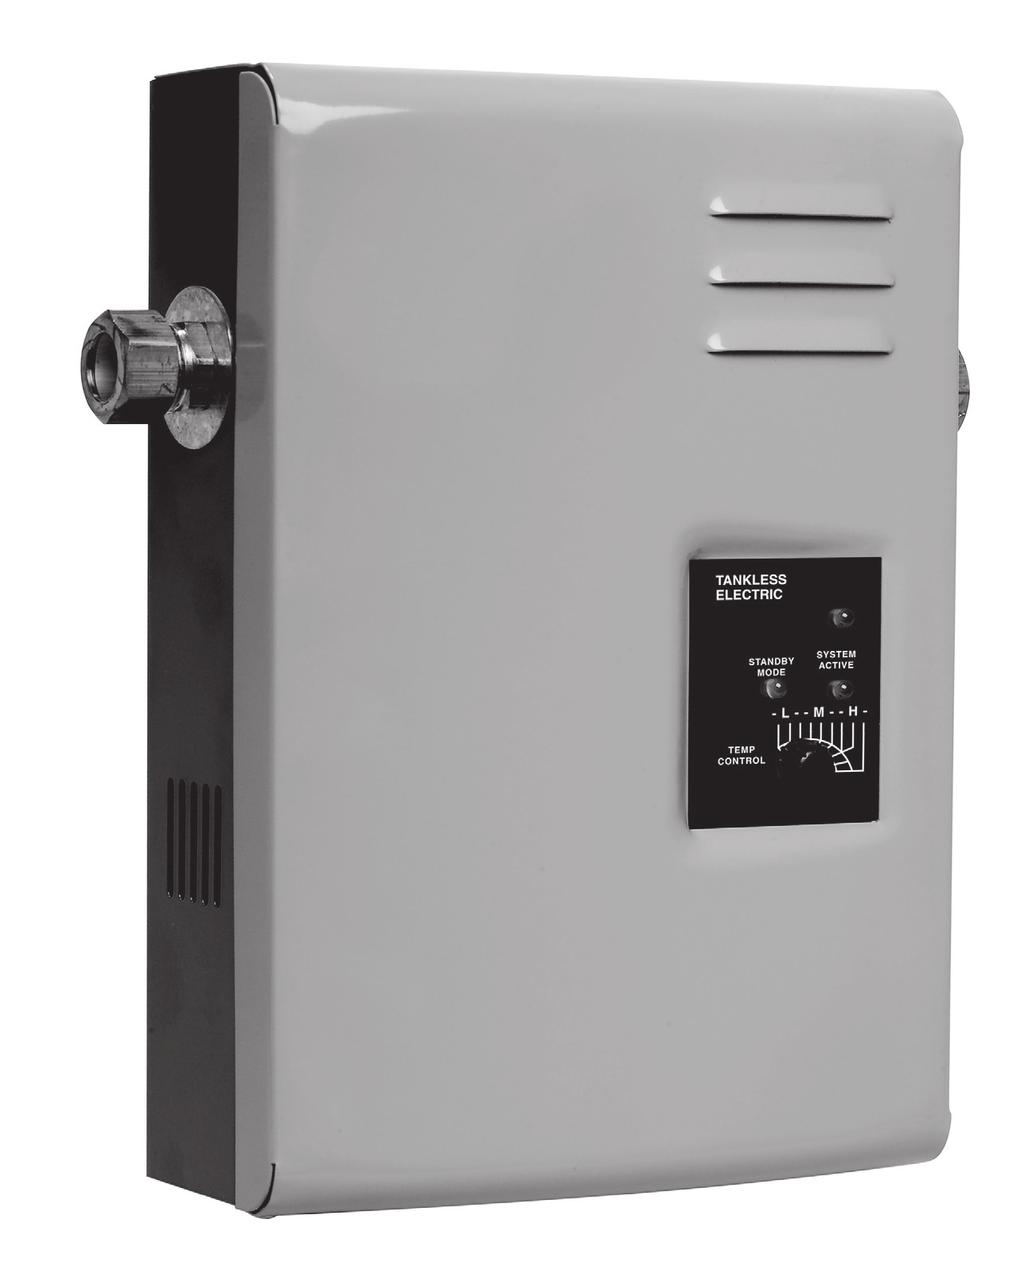 Use & Care Manual With Installation Instructions for the Installer Electric Tankless Water Heaters The purpose of this manual is twofold: one, to provide the installer with the basic directions and